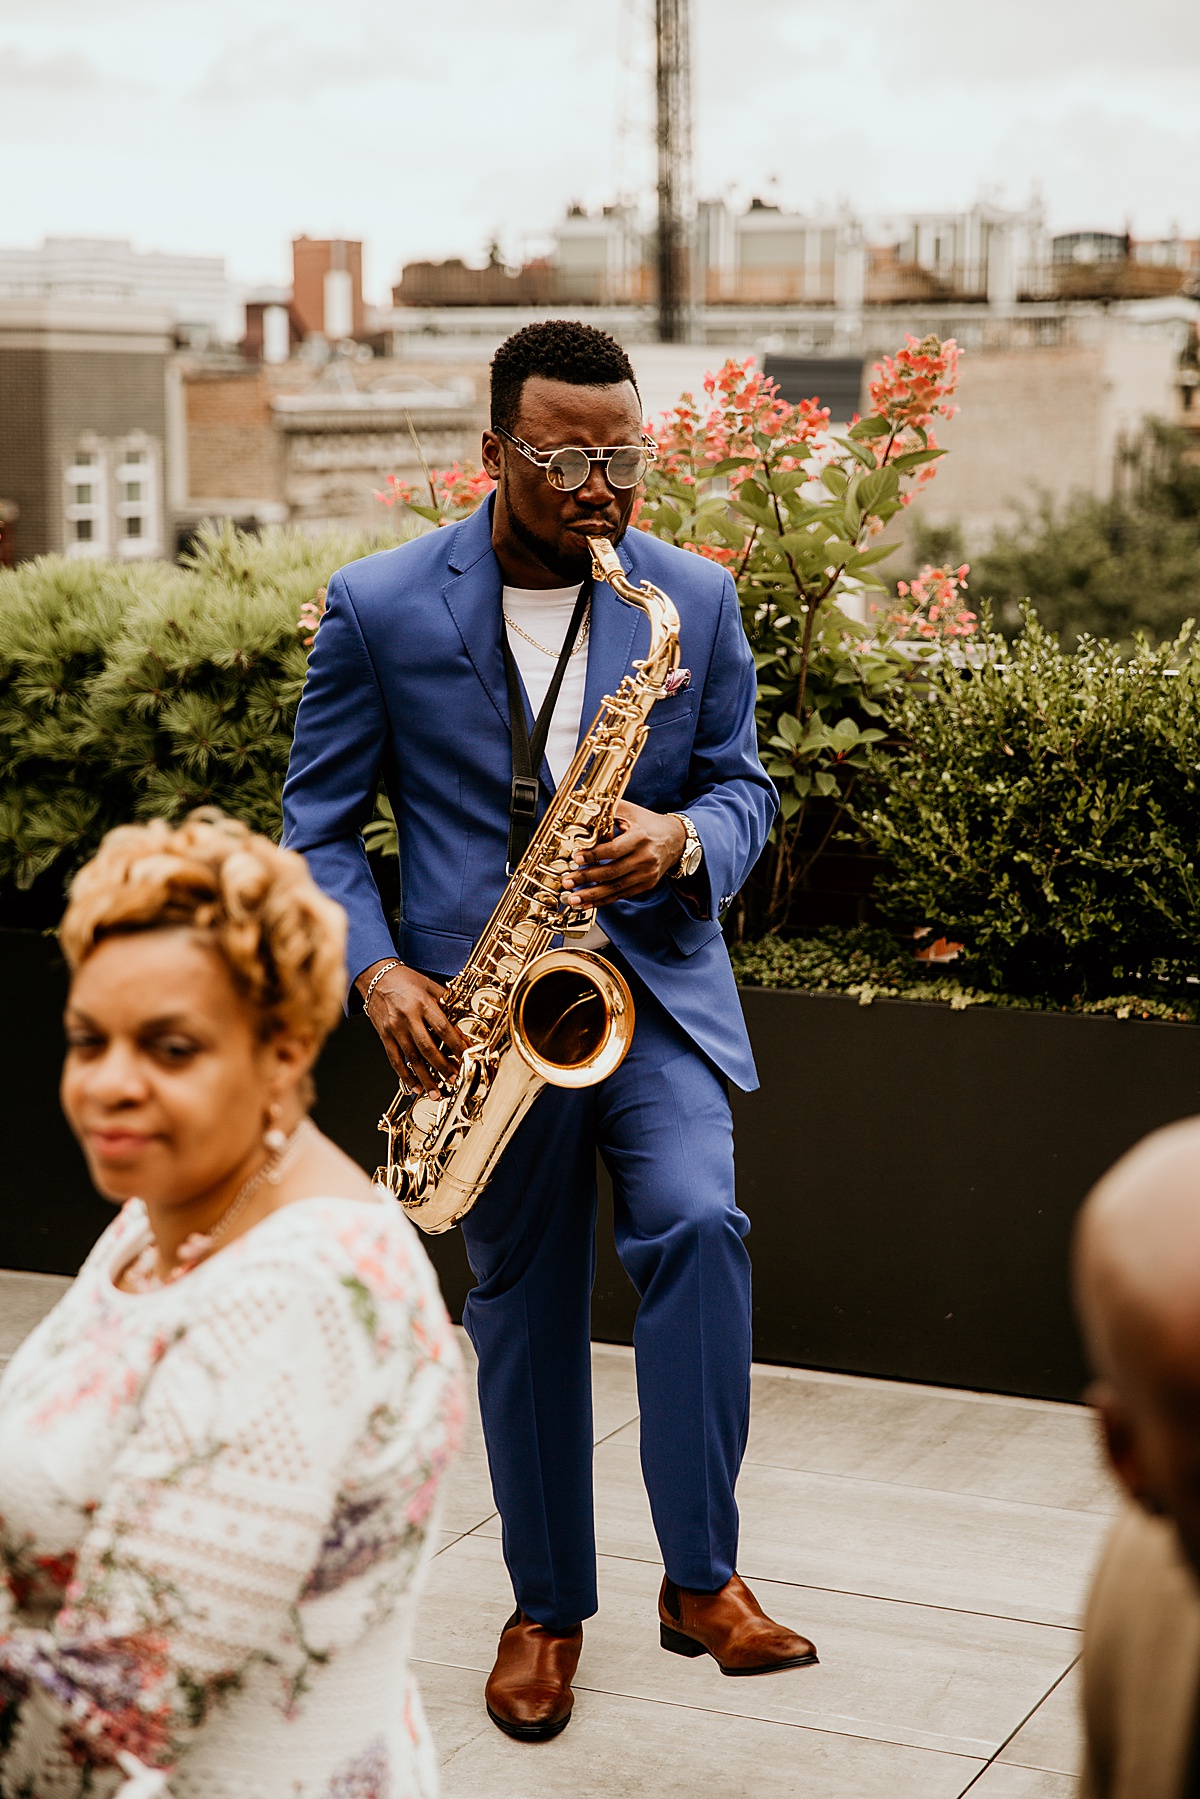 Saxophone player playing during a wedding ceremony.